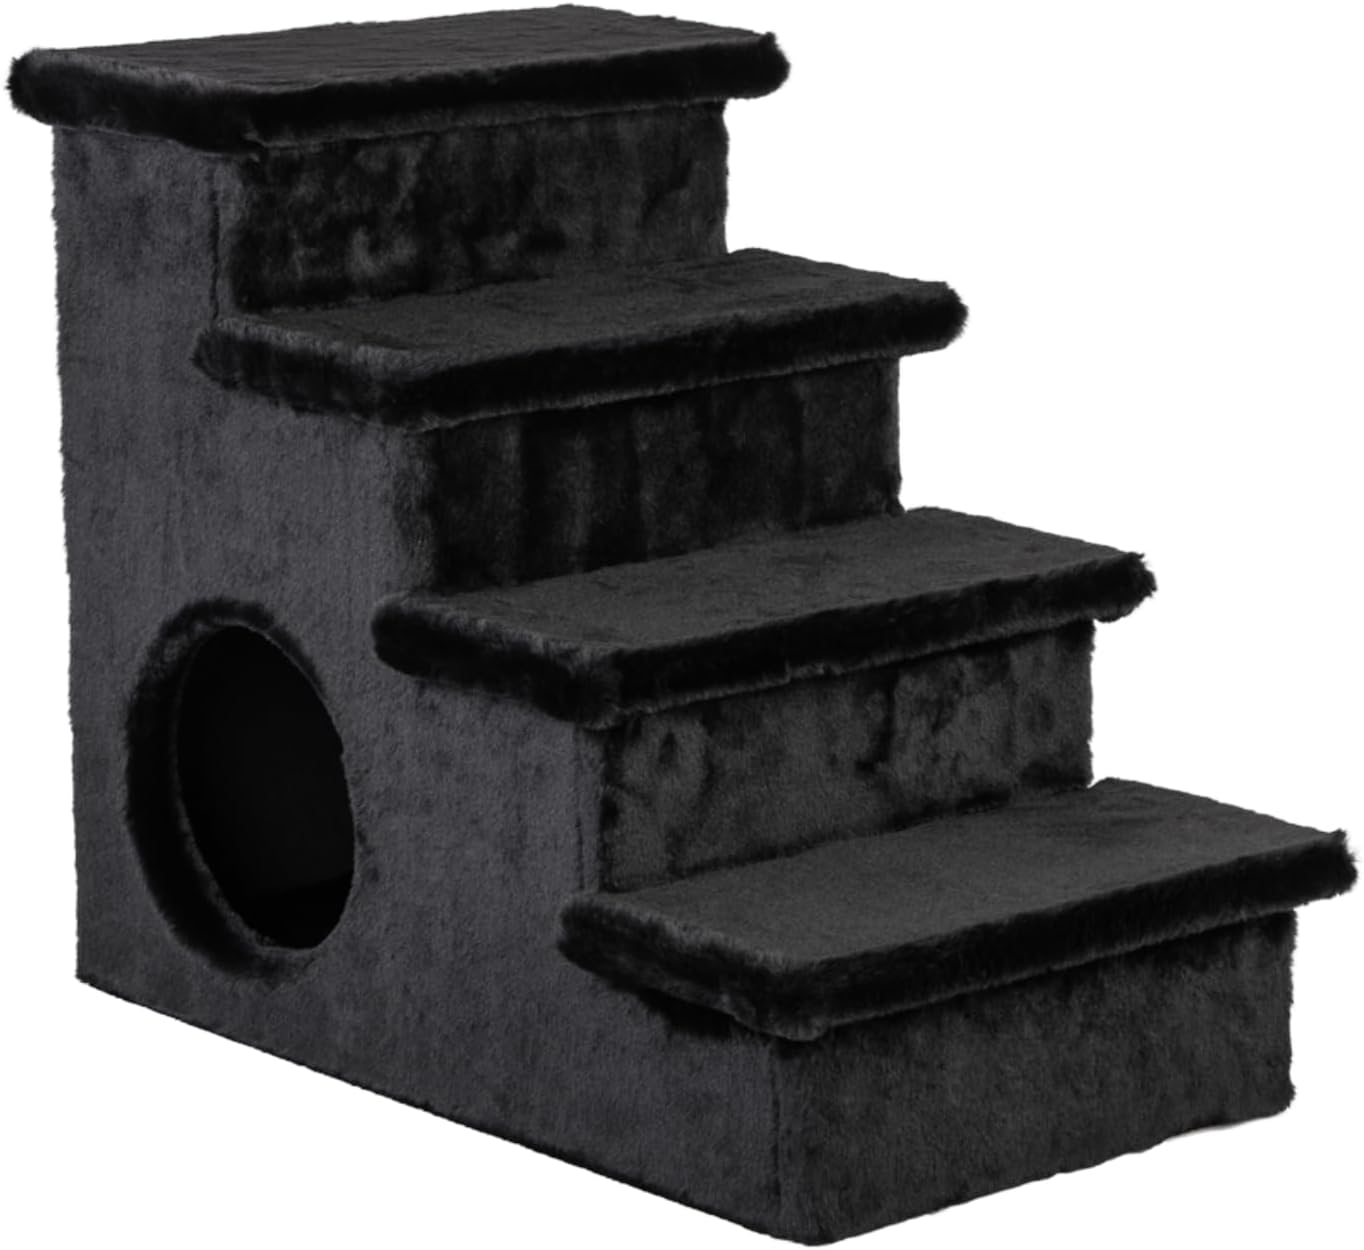 24 Inch X 22 Inch Stairs Hideout 4 Step Non Slip Pet Stairs for Cats Perfect High Beds & Couch & Window Sill Non-Slip Bottom (Black)